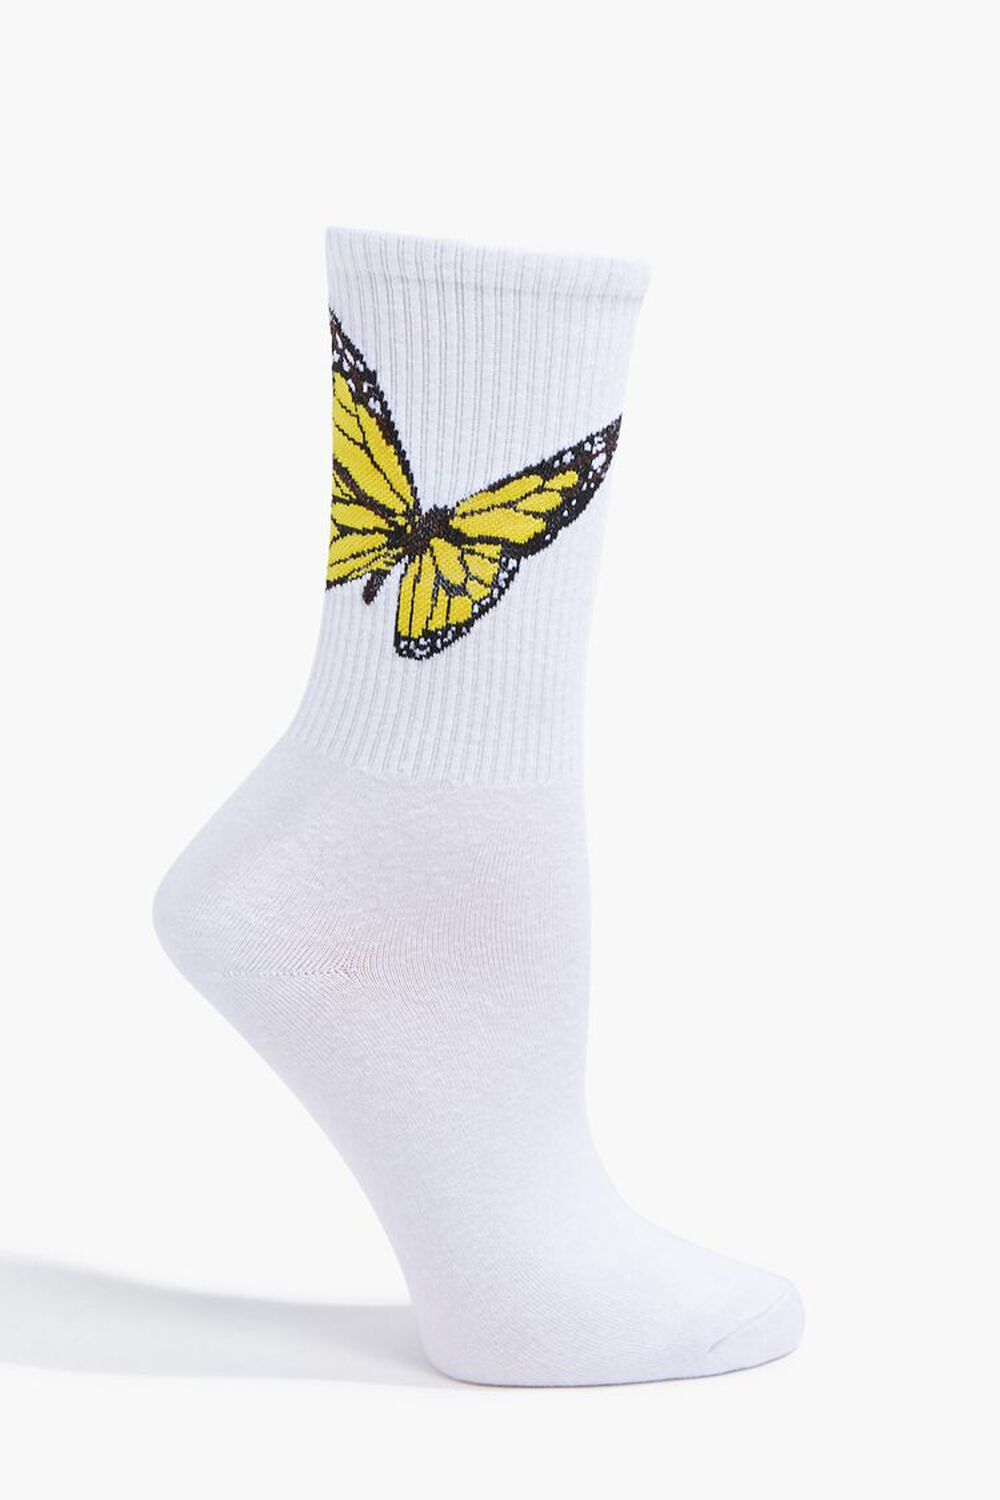 WHITE/YELLOW Butterfly Graphic Crew Socks, image 2